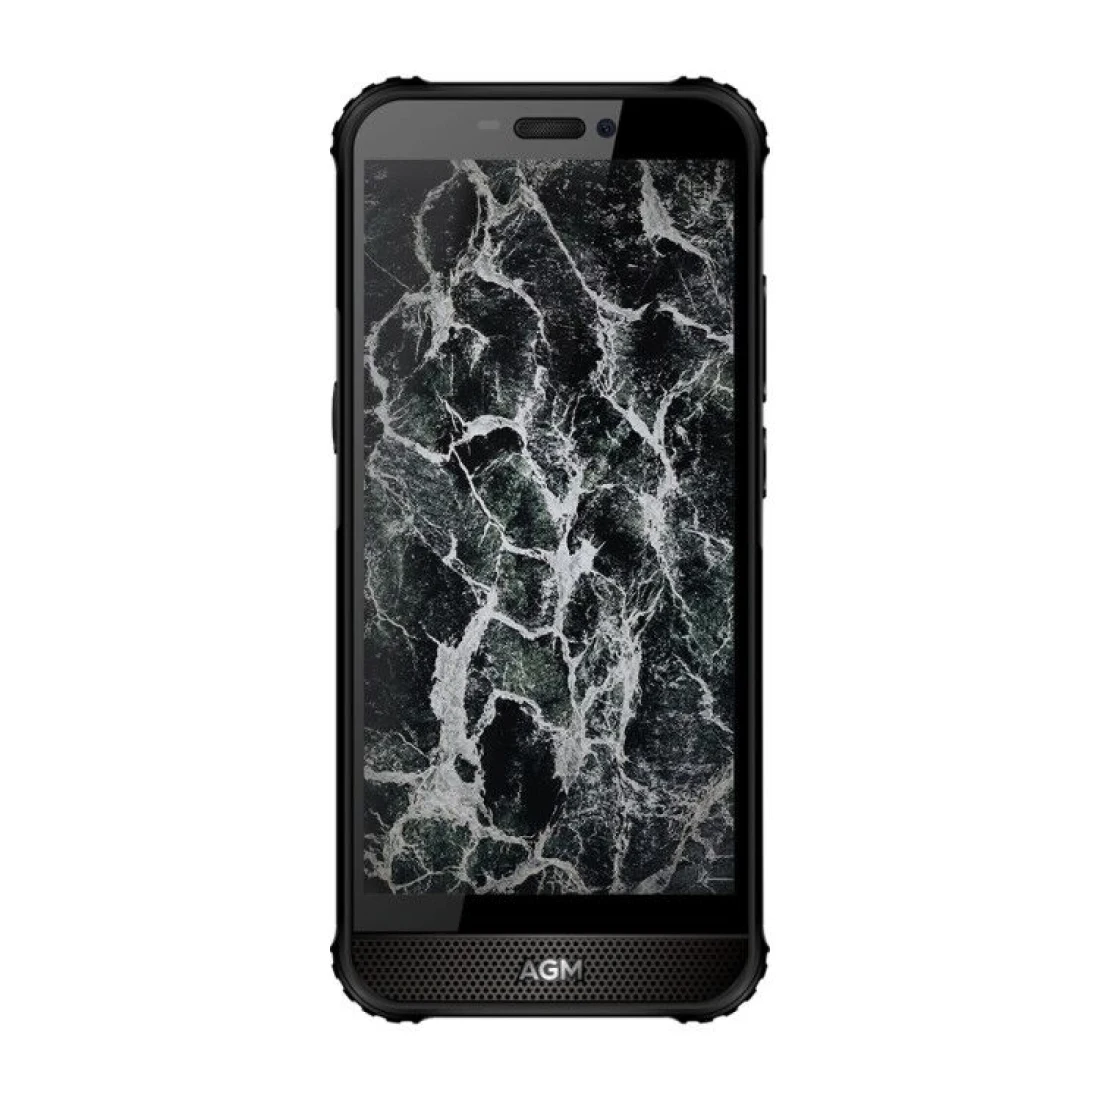 

Shipping Same Day For AGM A10 Rugged Phone 6GB+128GB Fingerprint Identification 4400mAh Battery 5.7 inch Android 9.0